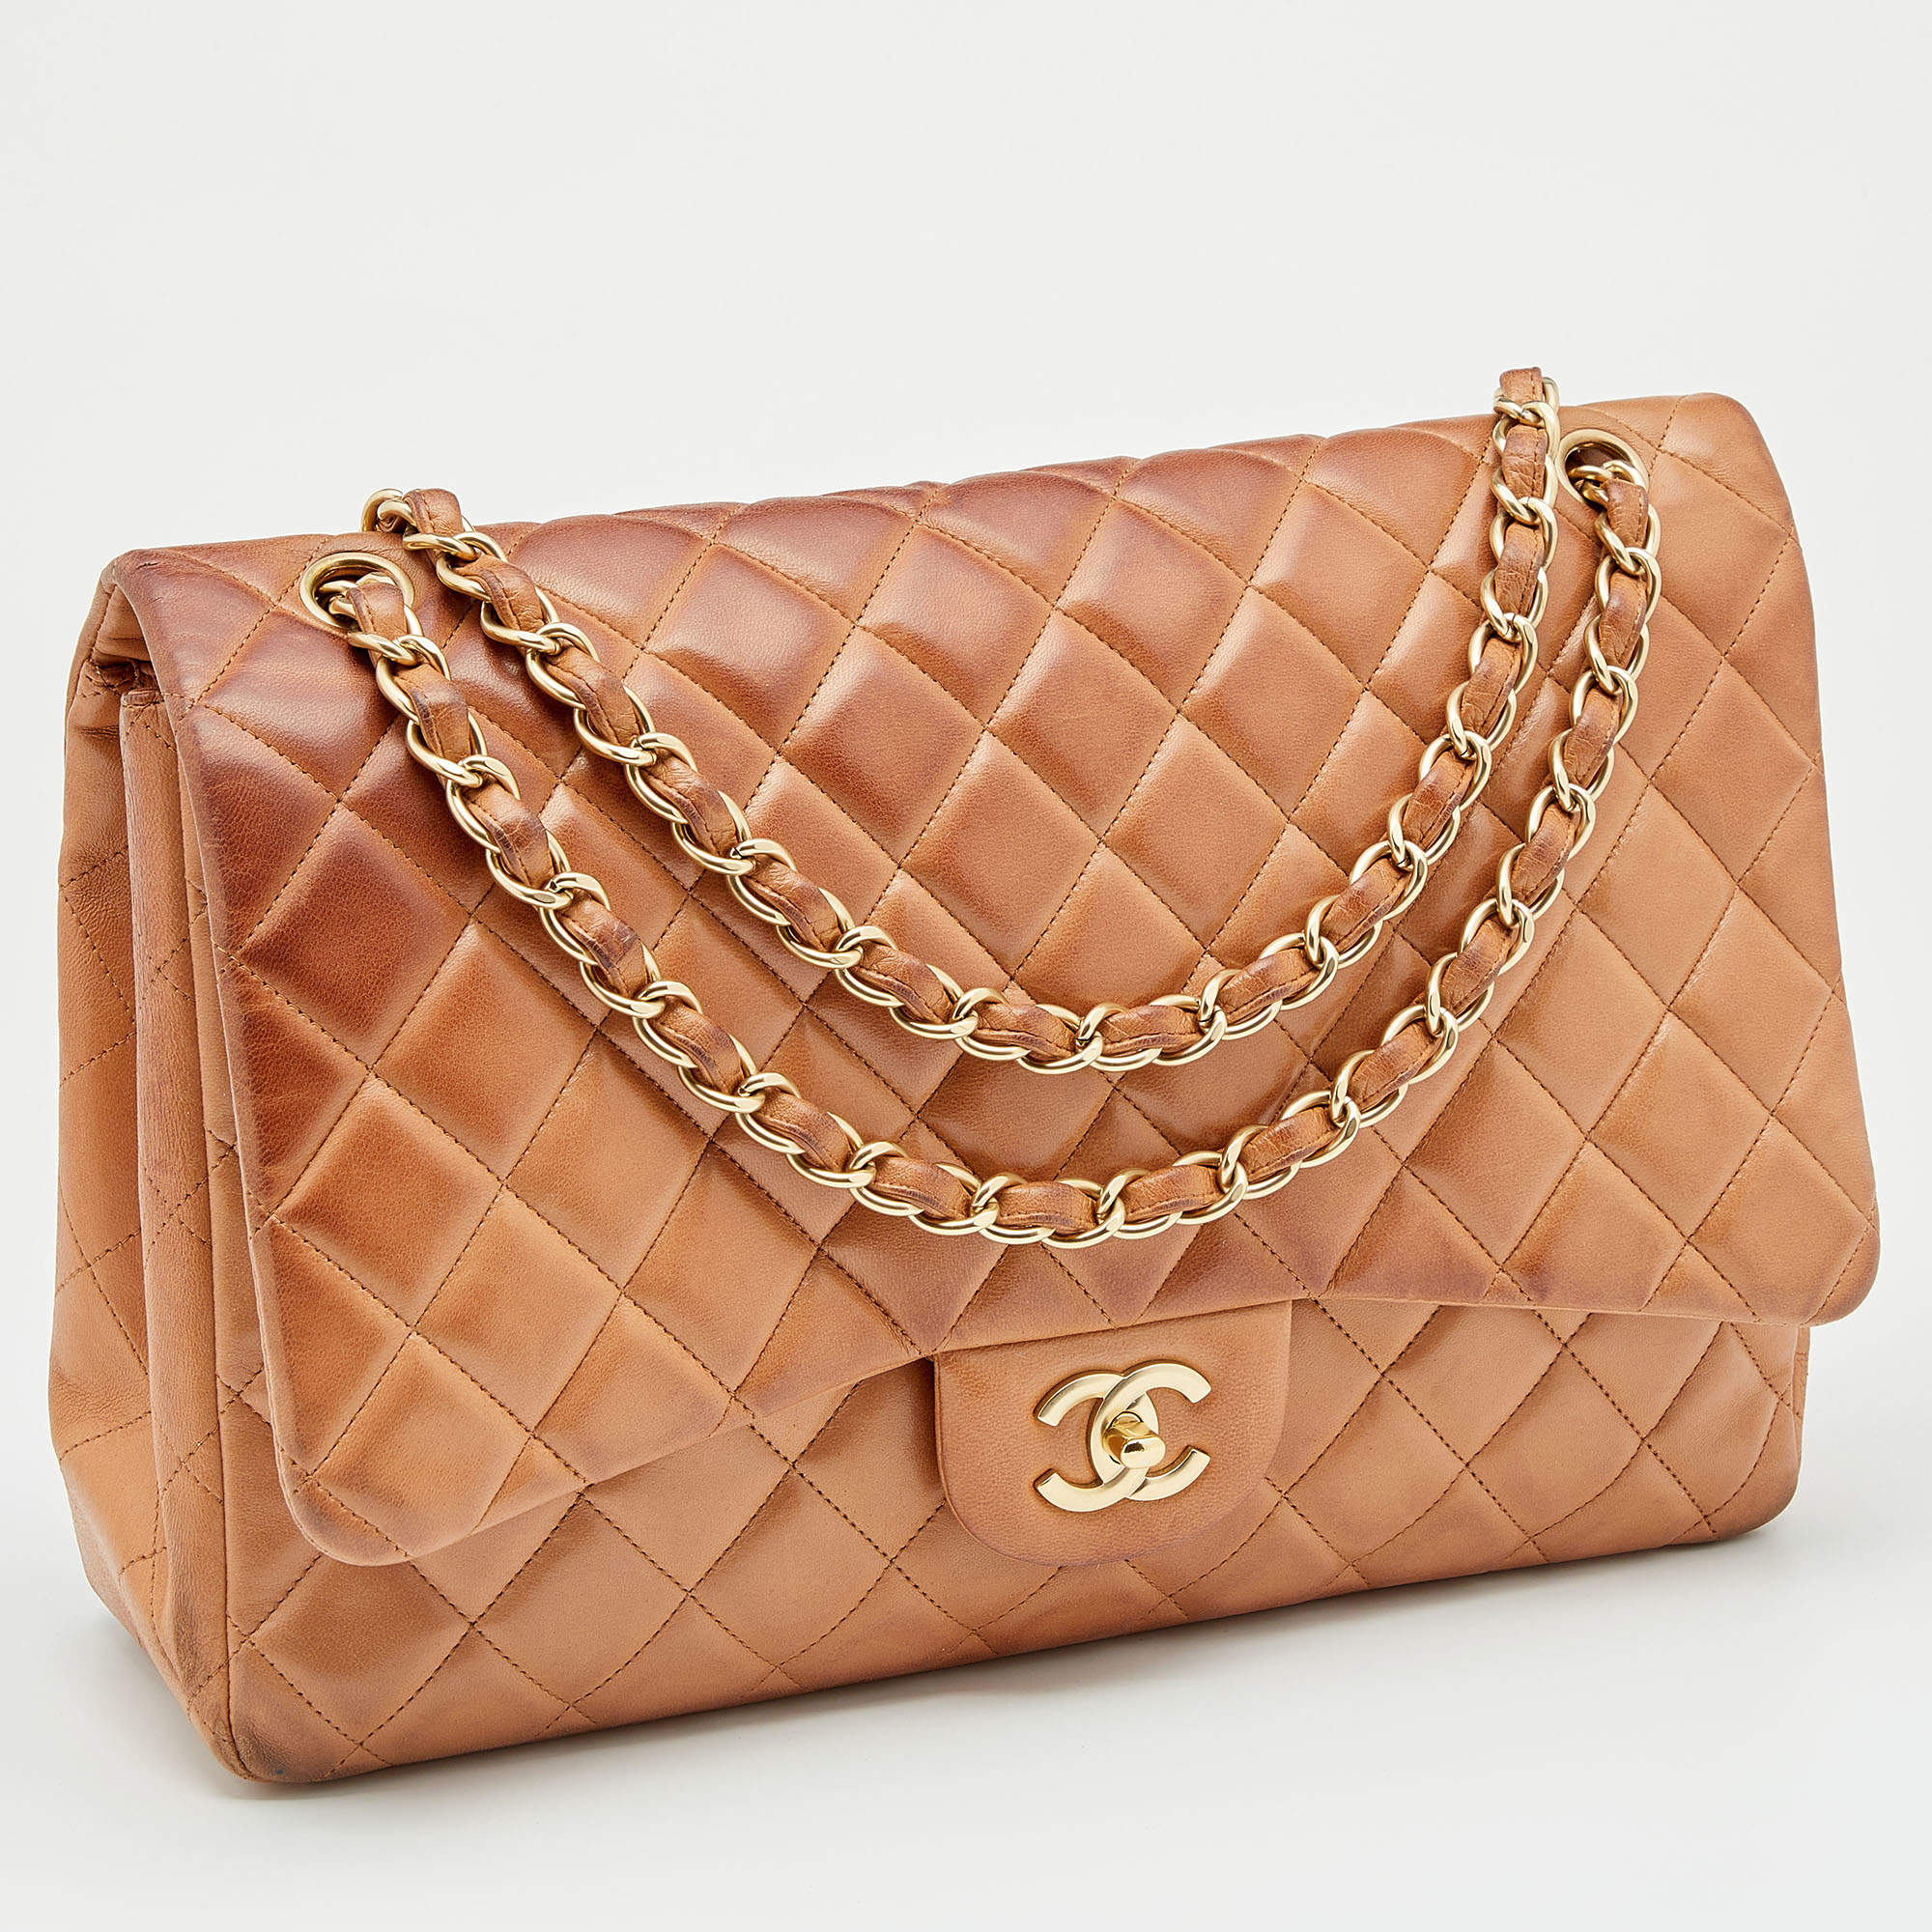 Chanel Caramel Quilted Leather Maxi Classic Single Flap Bag Chanel